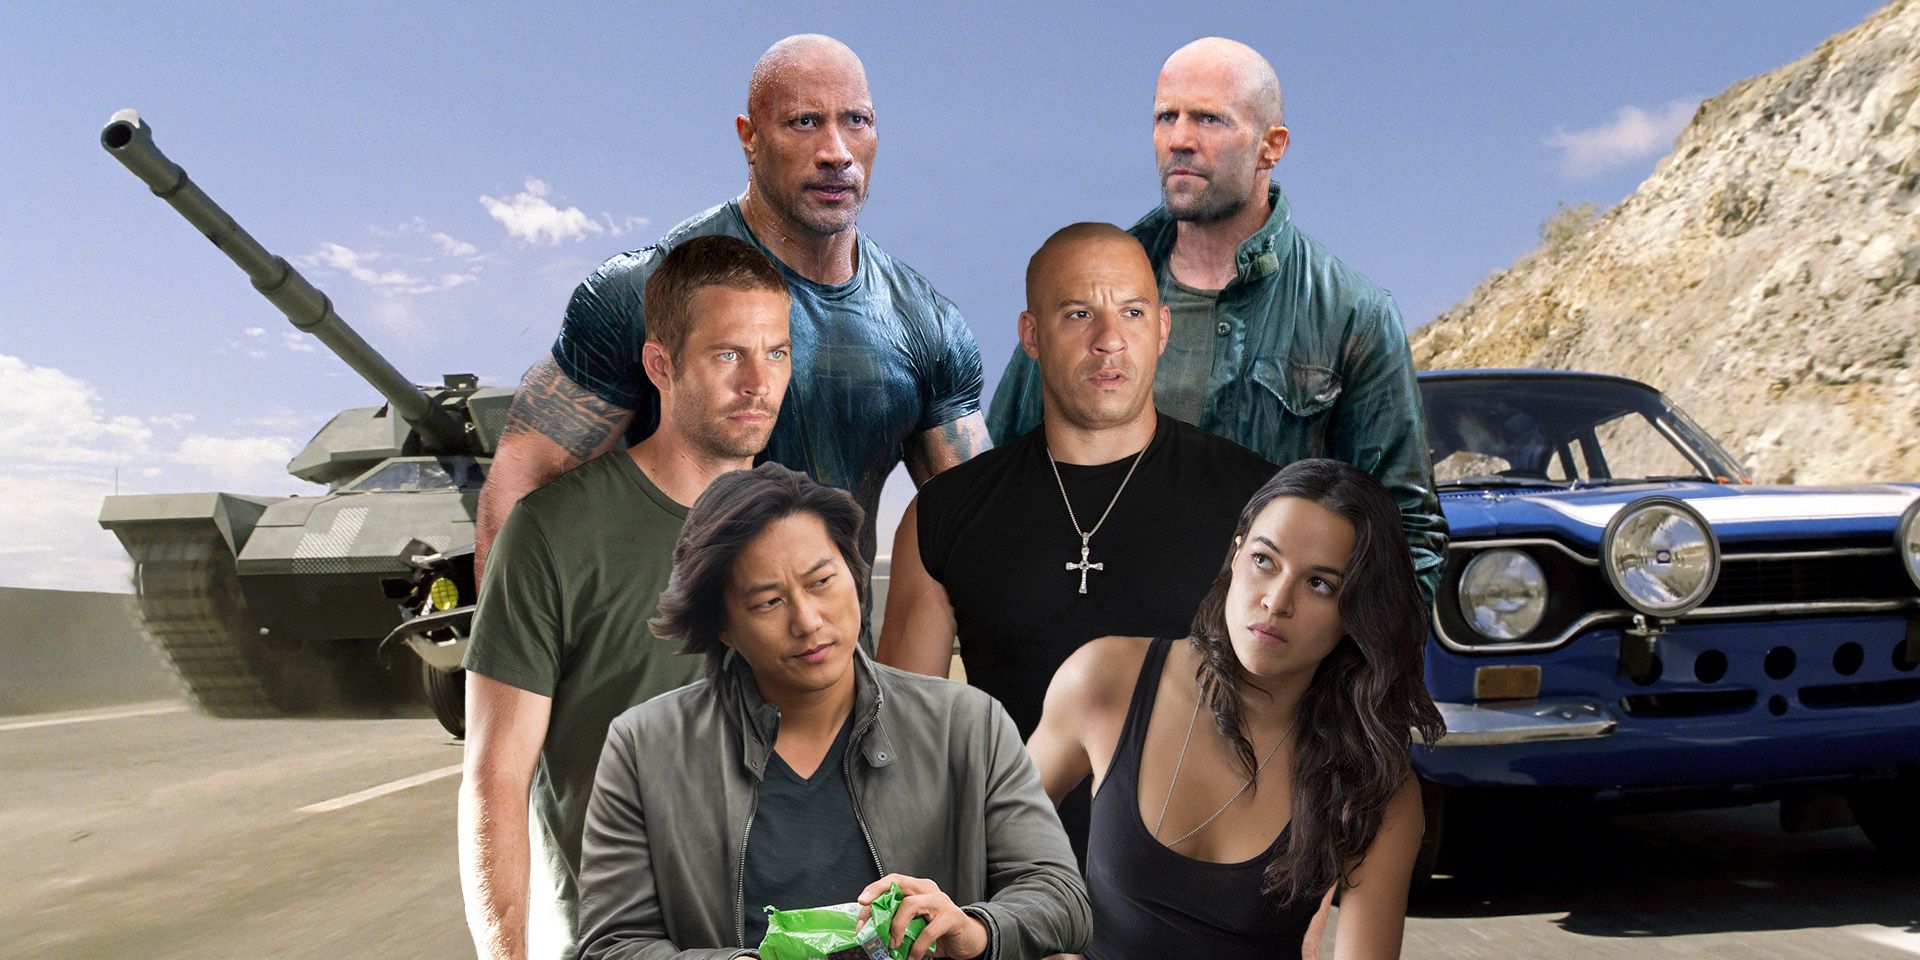 fast and furious 8 download kickass